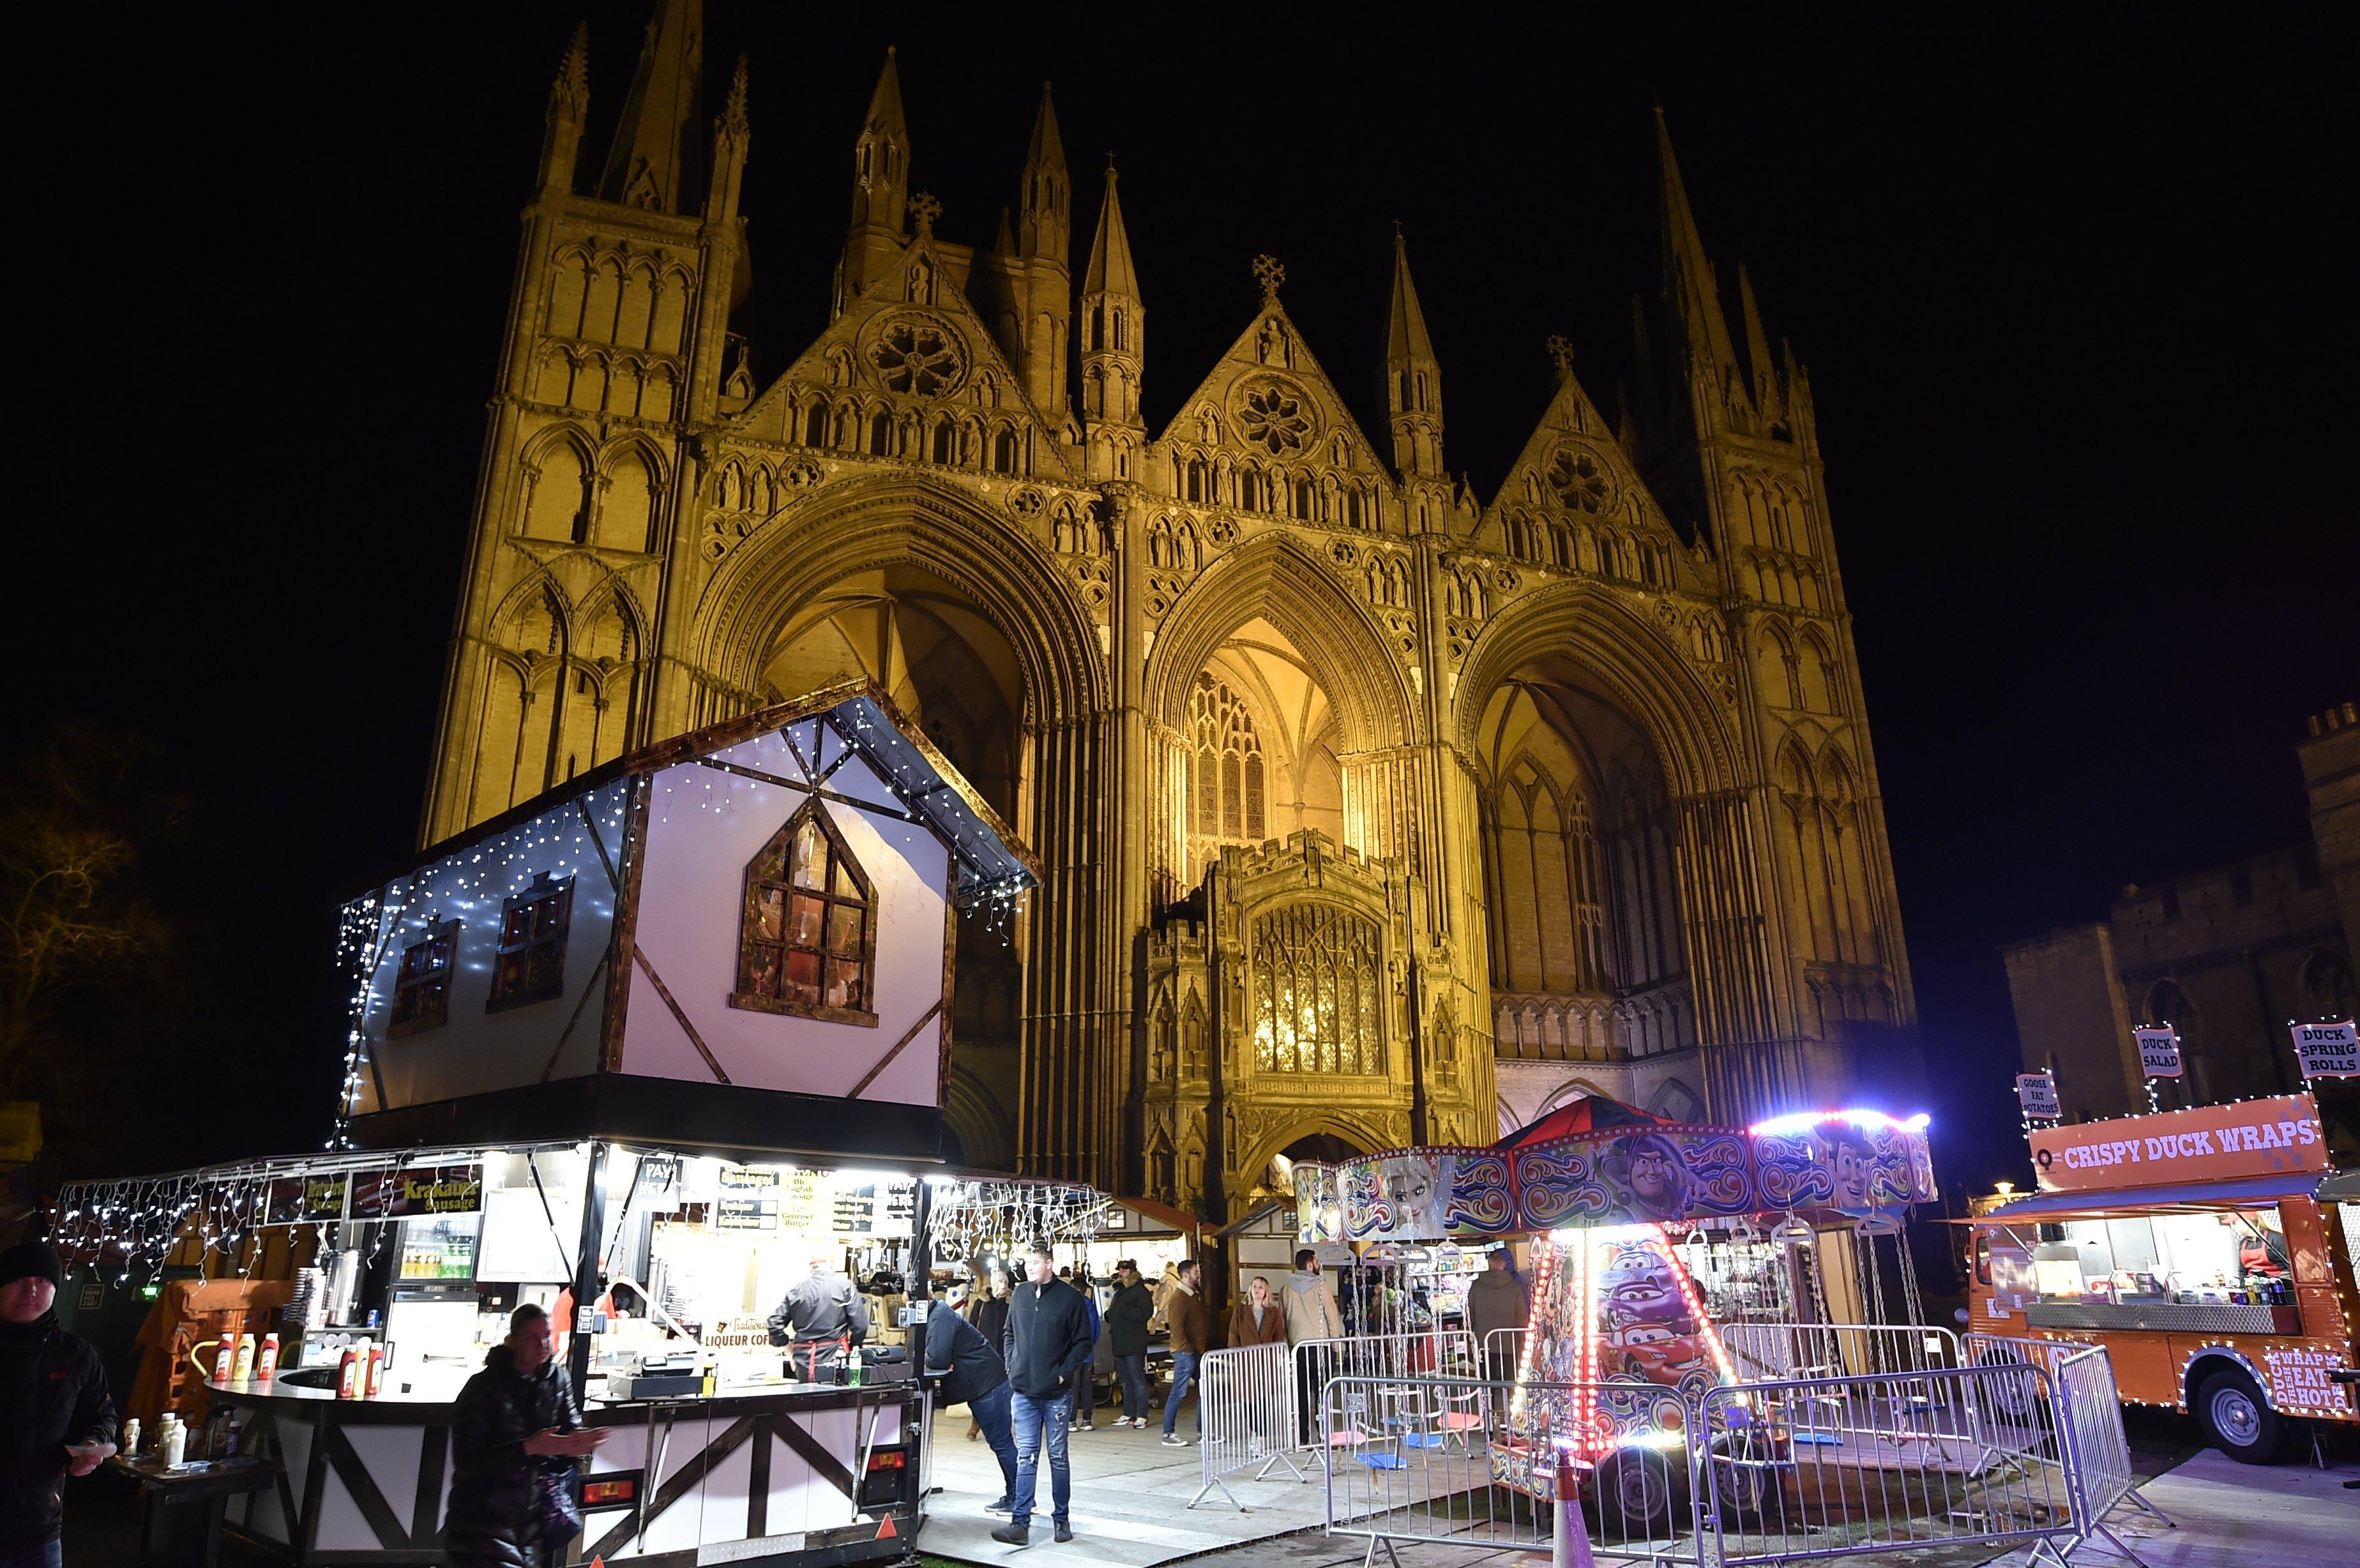 The Christmas market at the cathedral